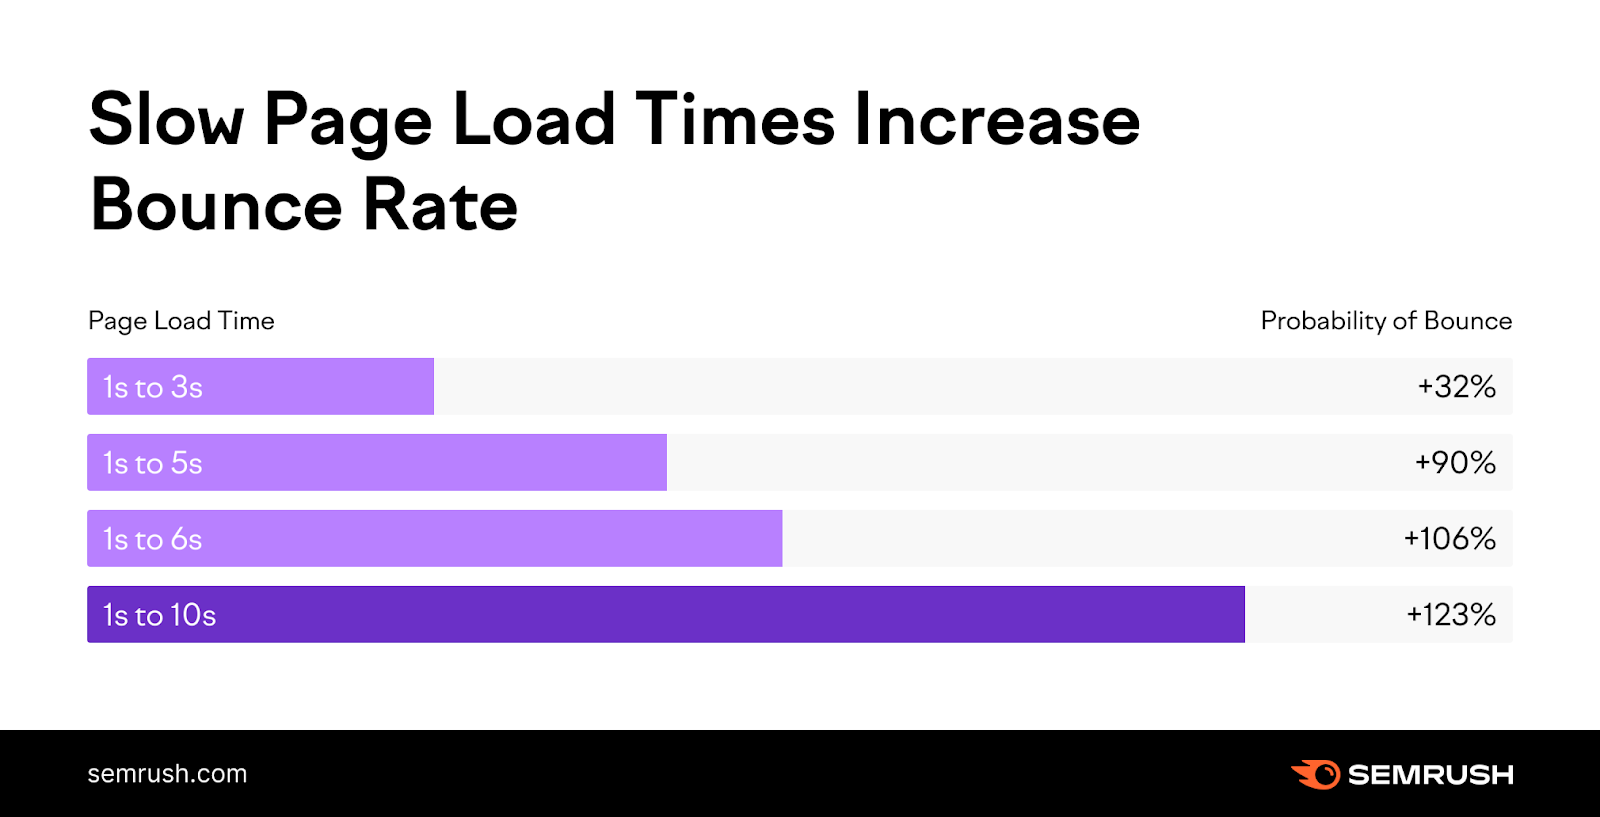 infographic showing how "slow page load times increase bounce rate"